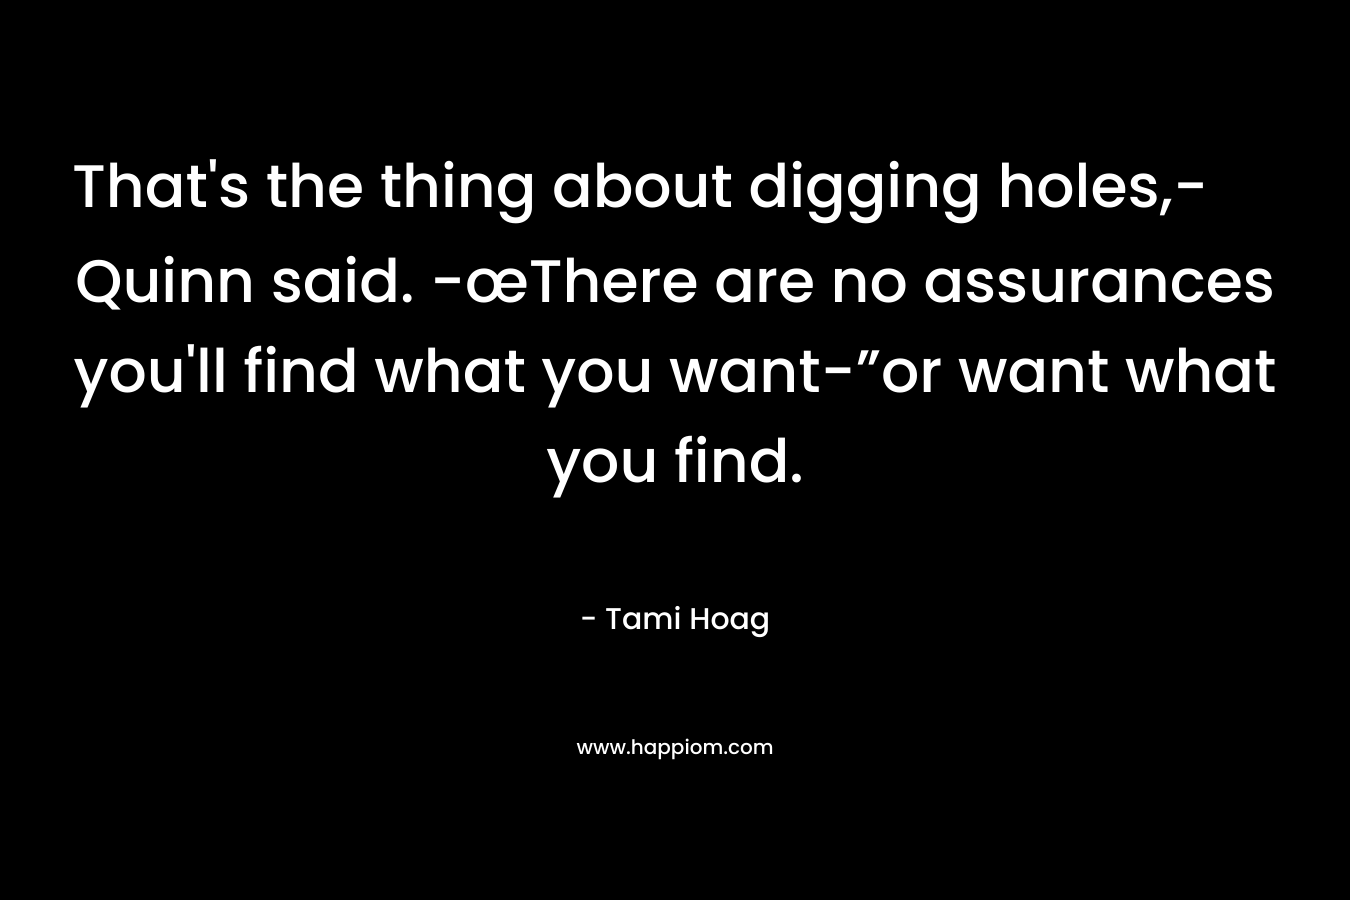 That’s the thing about digging holes,- Quinn said. -œThere are no assurances you’ll find what you want-”or want what you find. – Tami Hoag